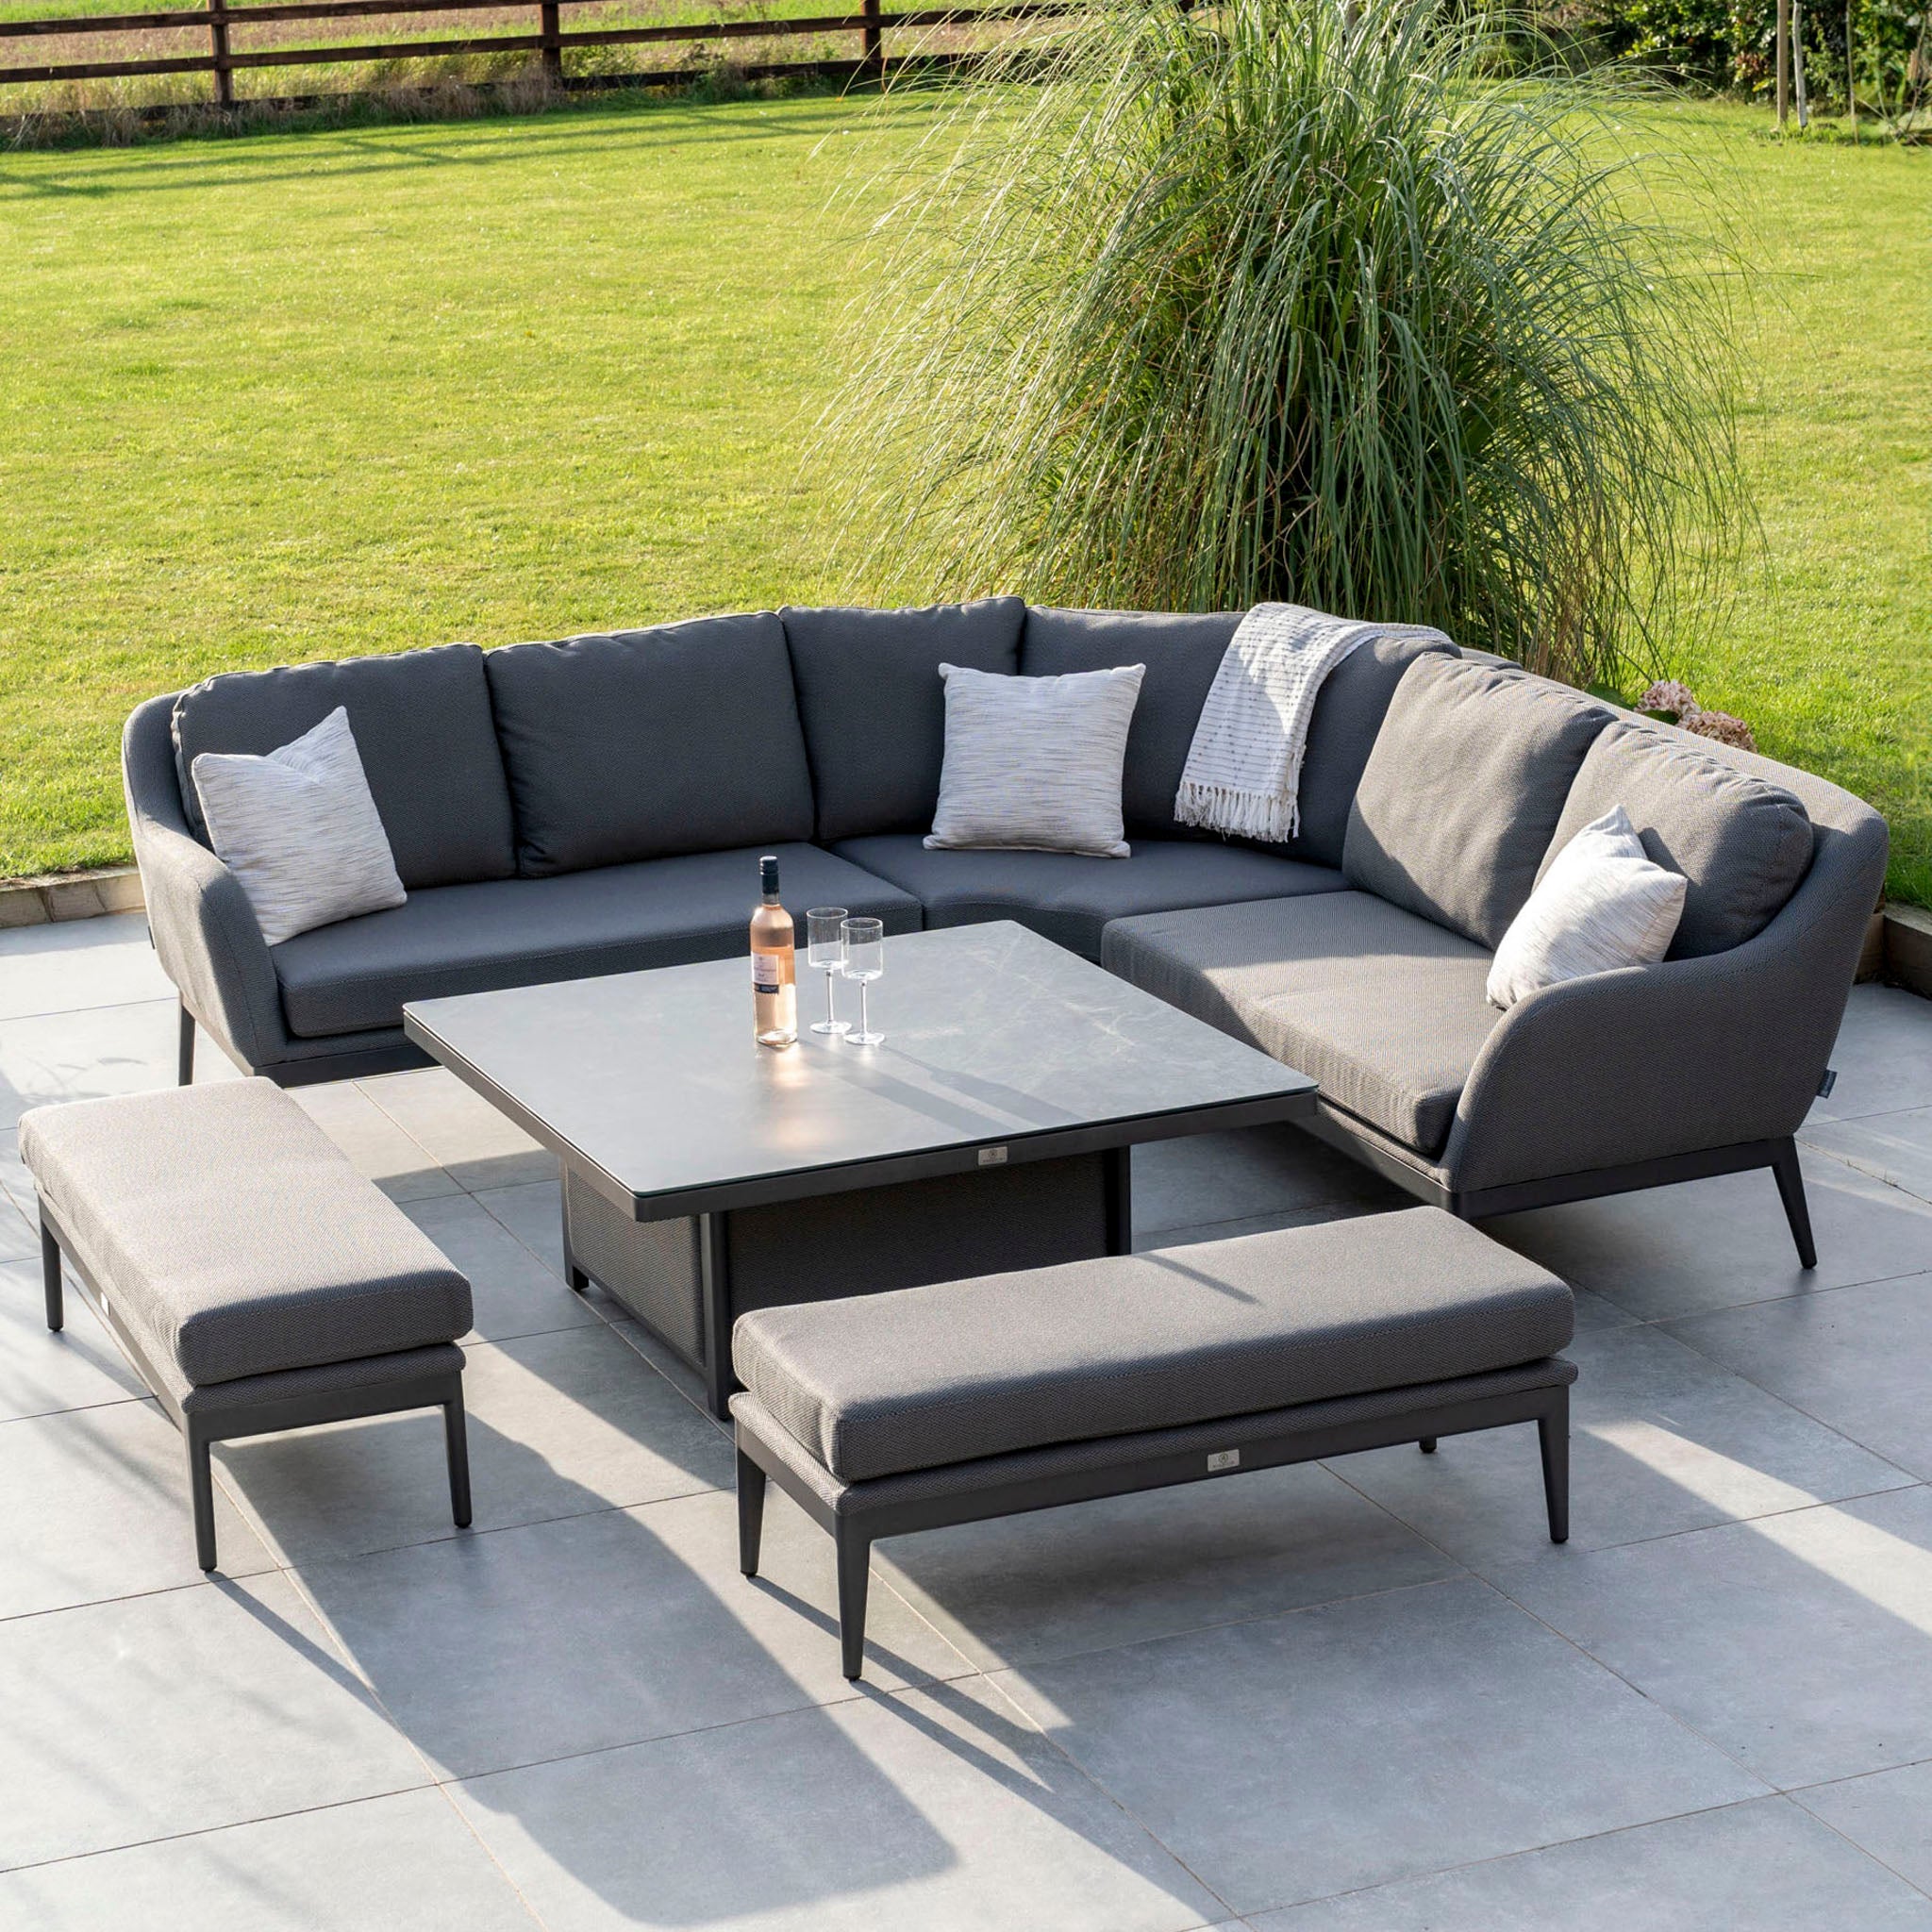 Luna Deluxe Outdoor Fabric Square Corner Dining Set with Rising Table in Grey